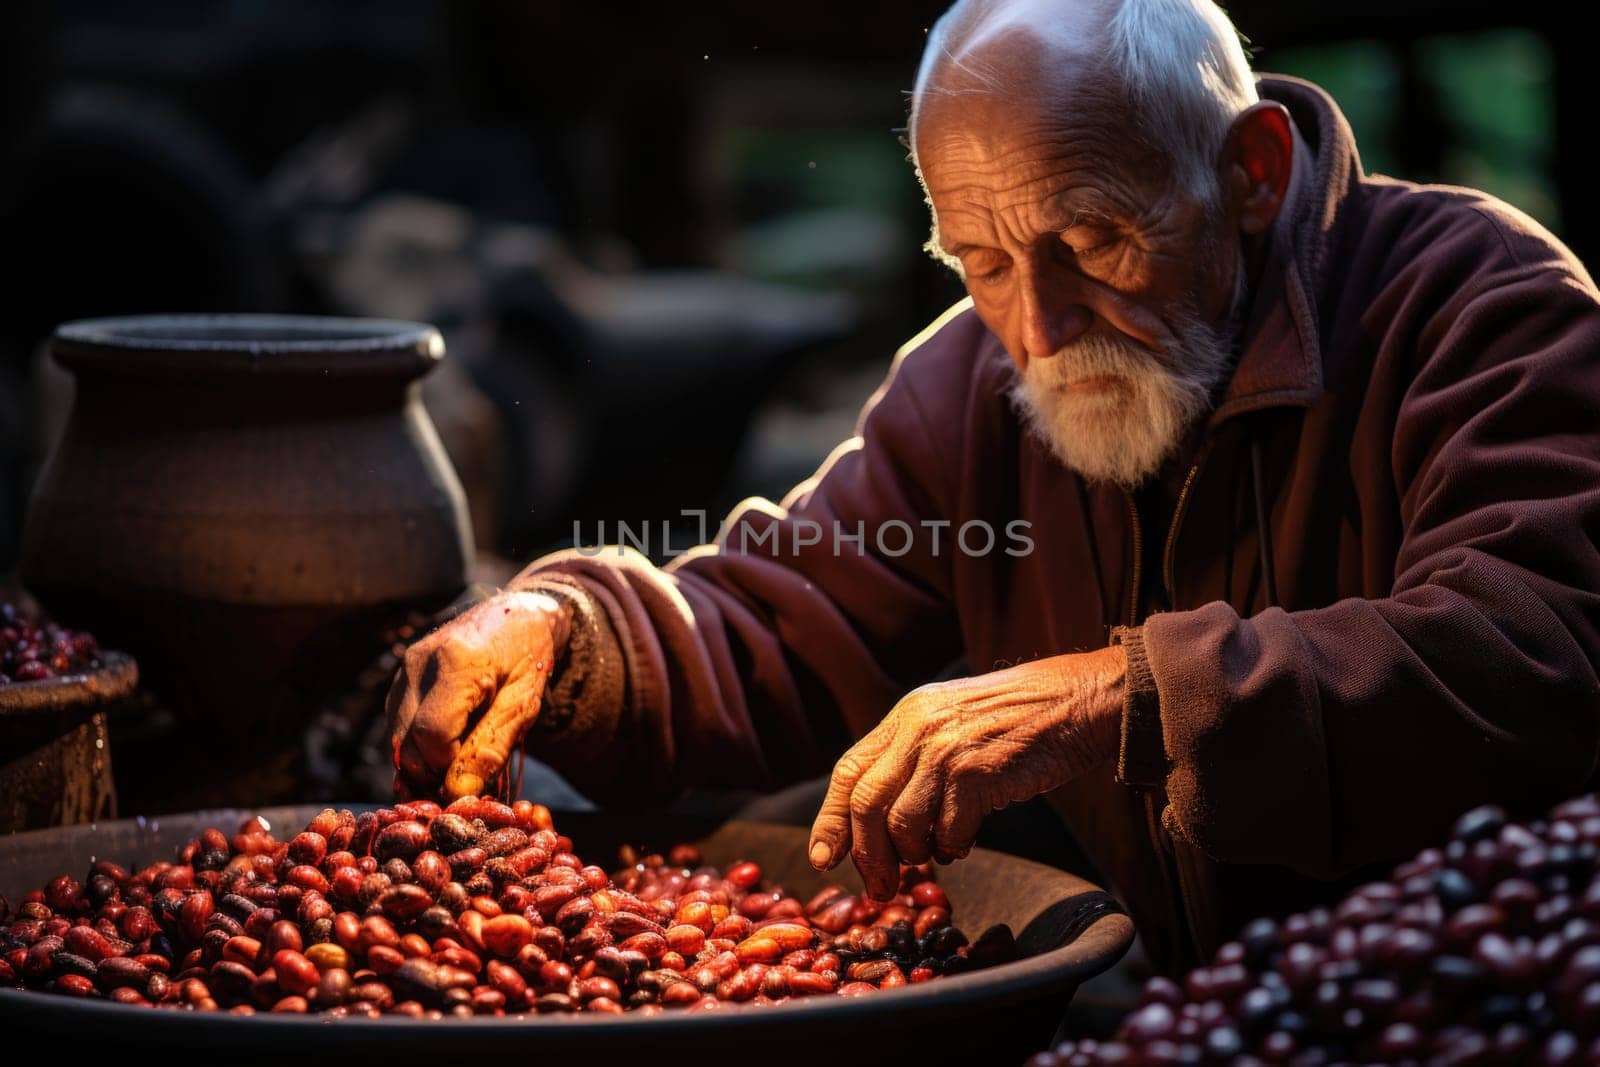 The farmer looks at the freshly picked coffee lying in a large plate.